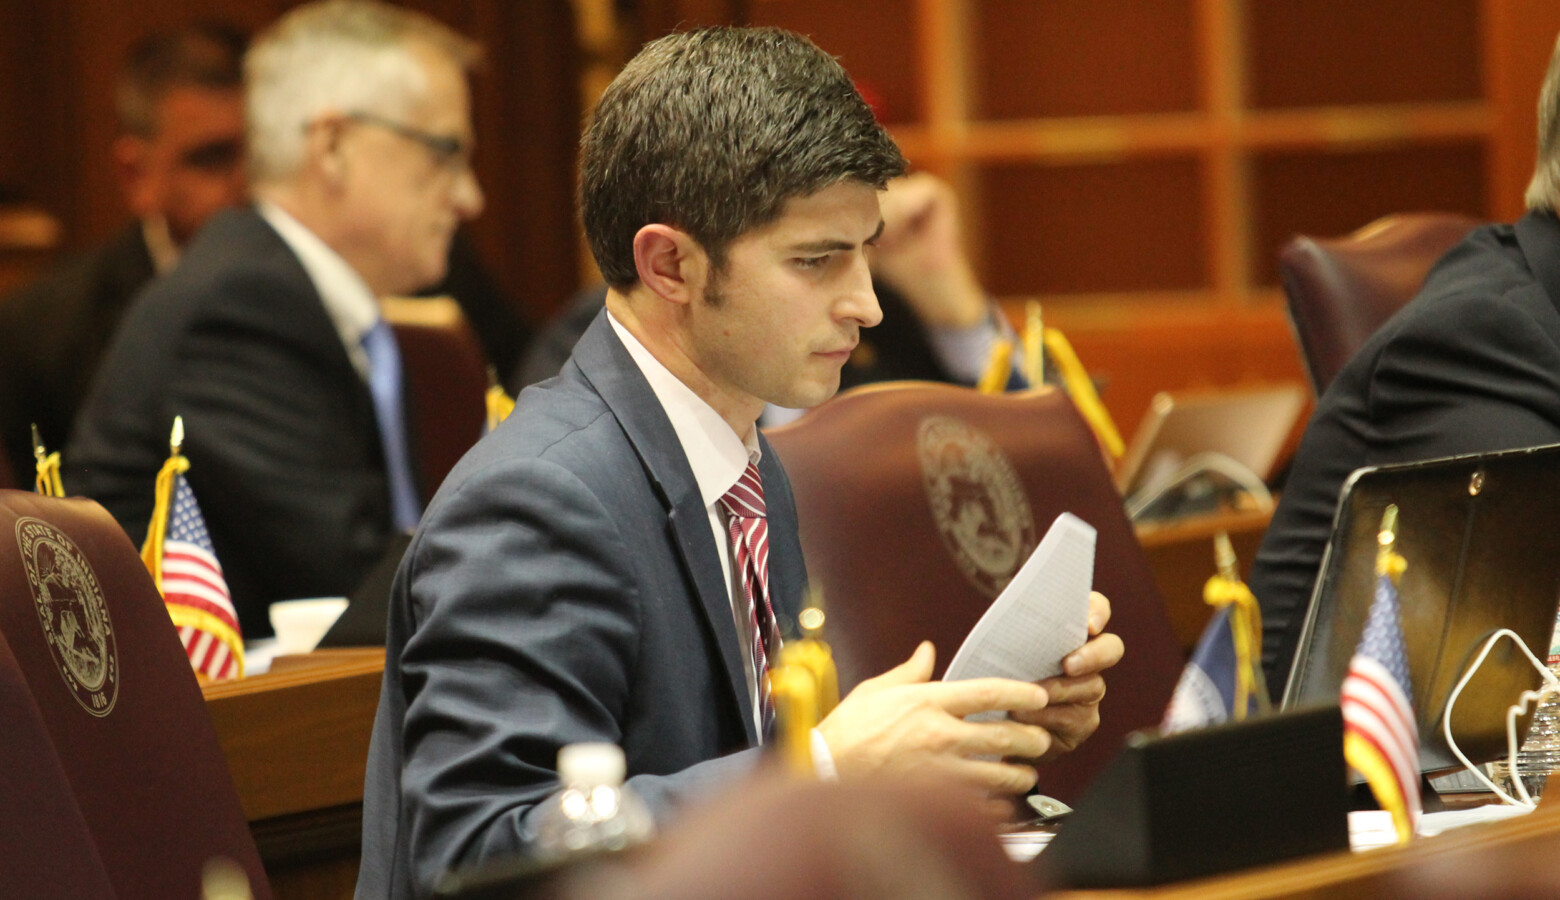 Rep. Tim Wesco (R-Osceola) says his amendment is good policy – outside of the groping allegations against Attorney General Curtis Hill. (Lauren Chapman/IPB News)